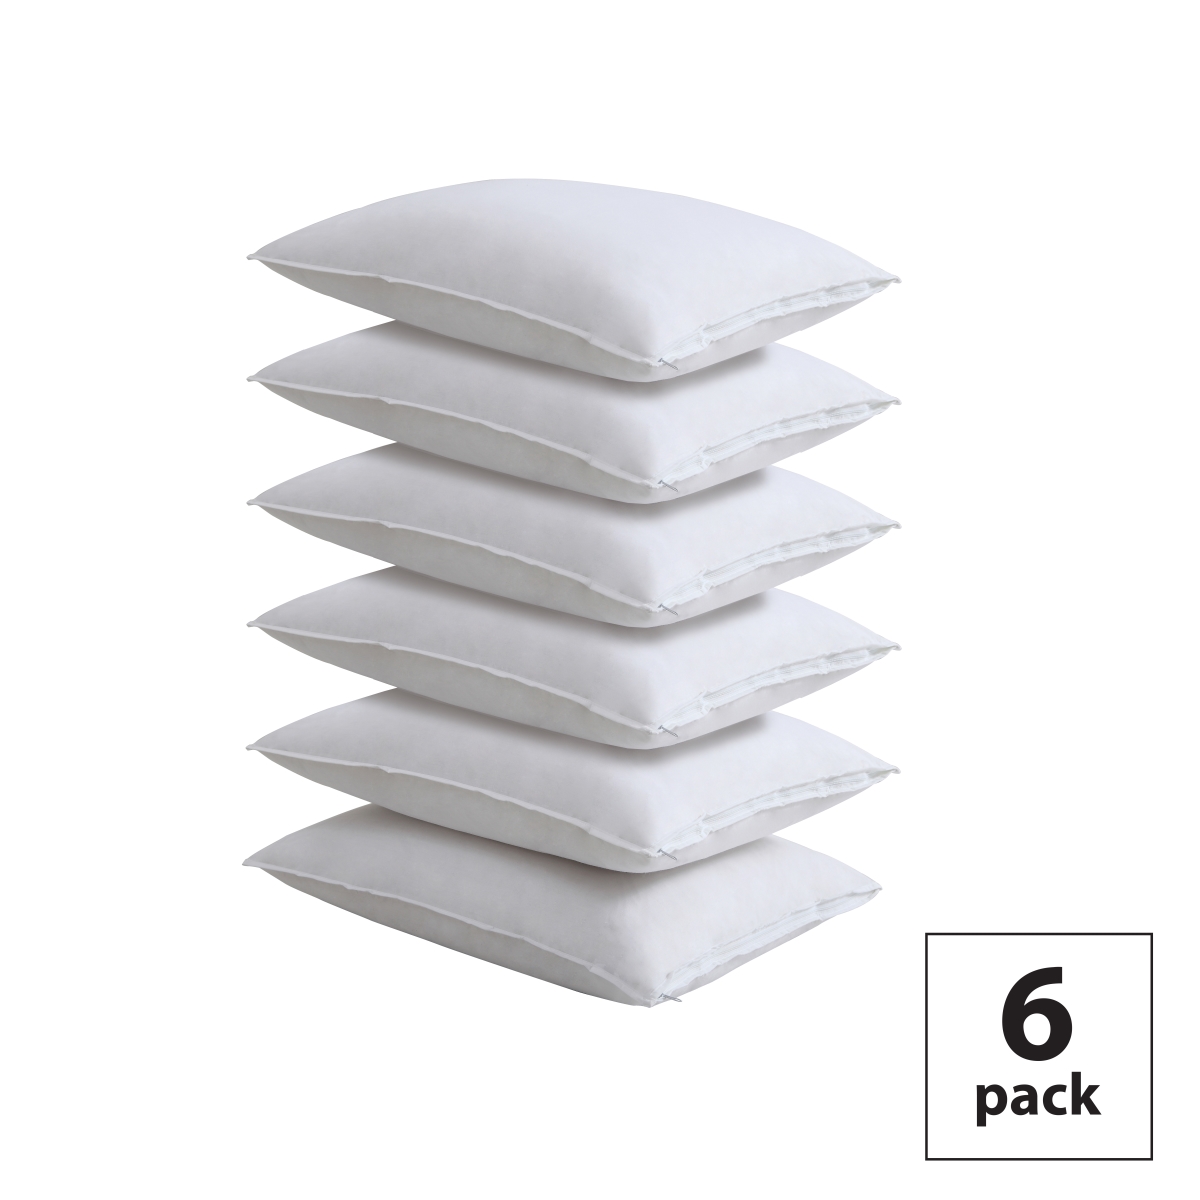 Fre10006whit08 100 Percent Cotton Pillow Protectors, Queen Size - Pack Of 6